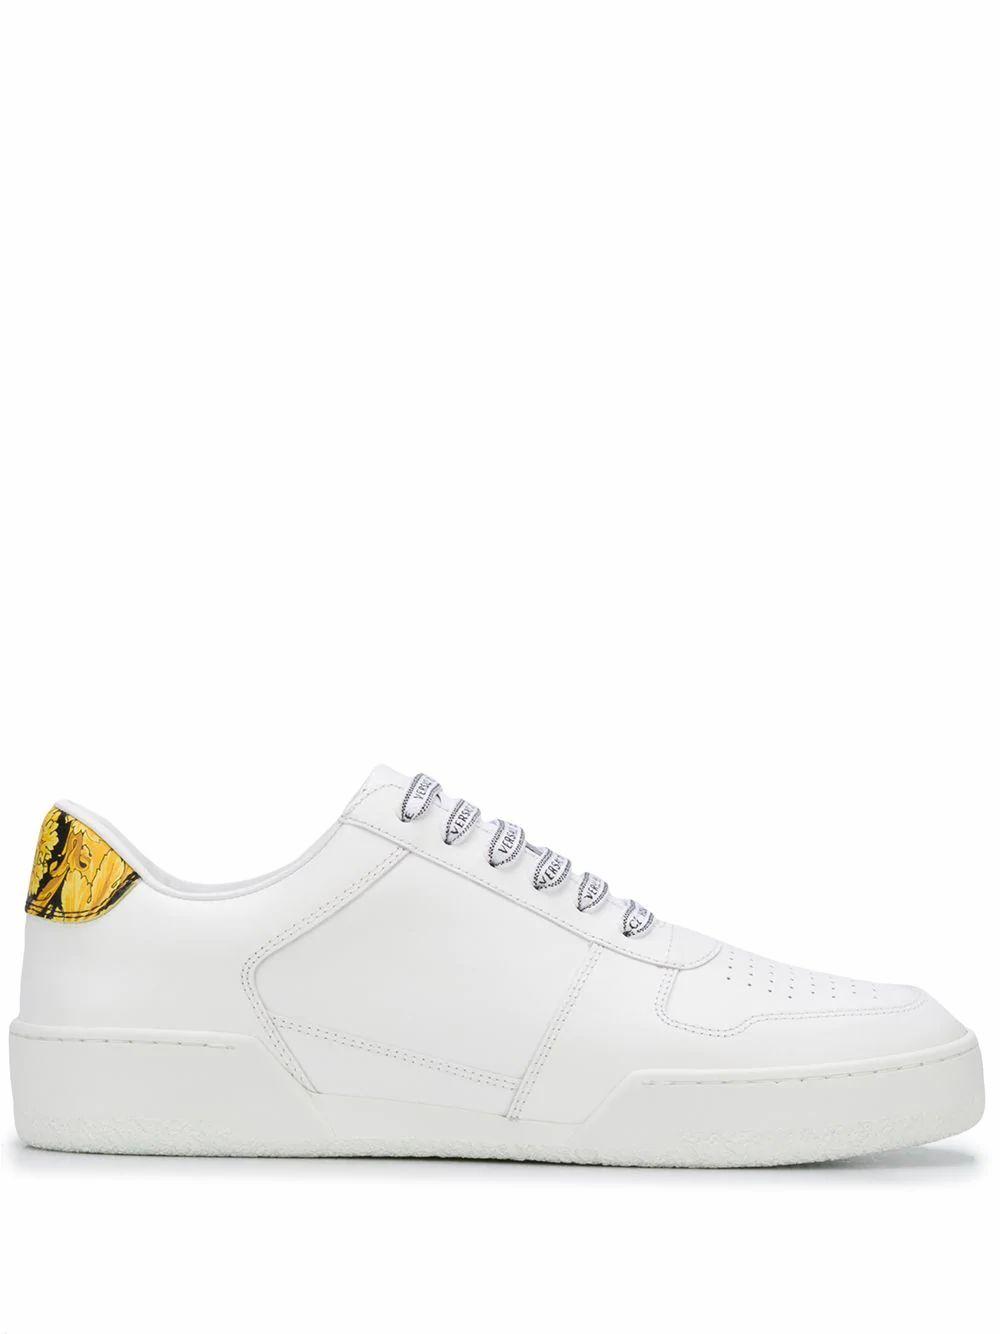 Versace Baroque-print Leather Sneakers in White - Save 64% - Lyst